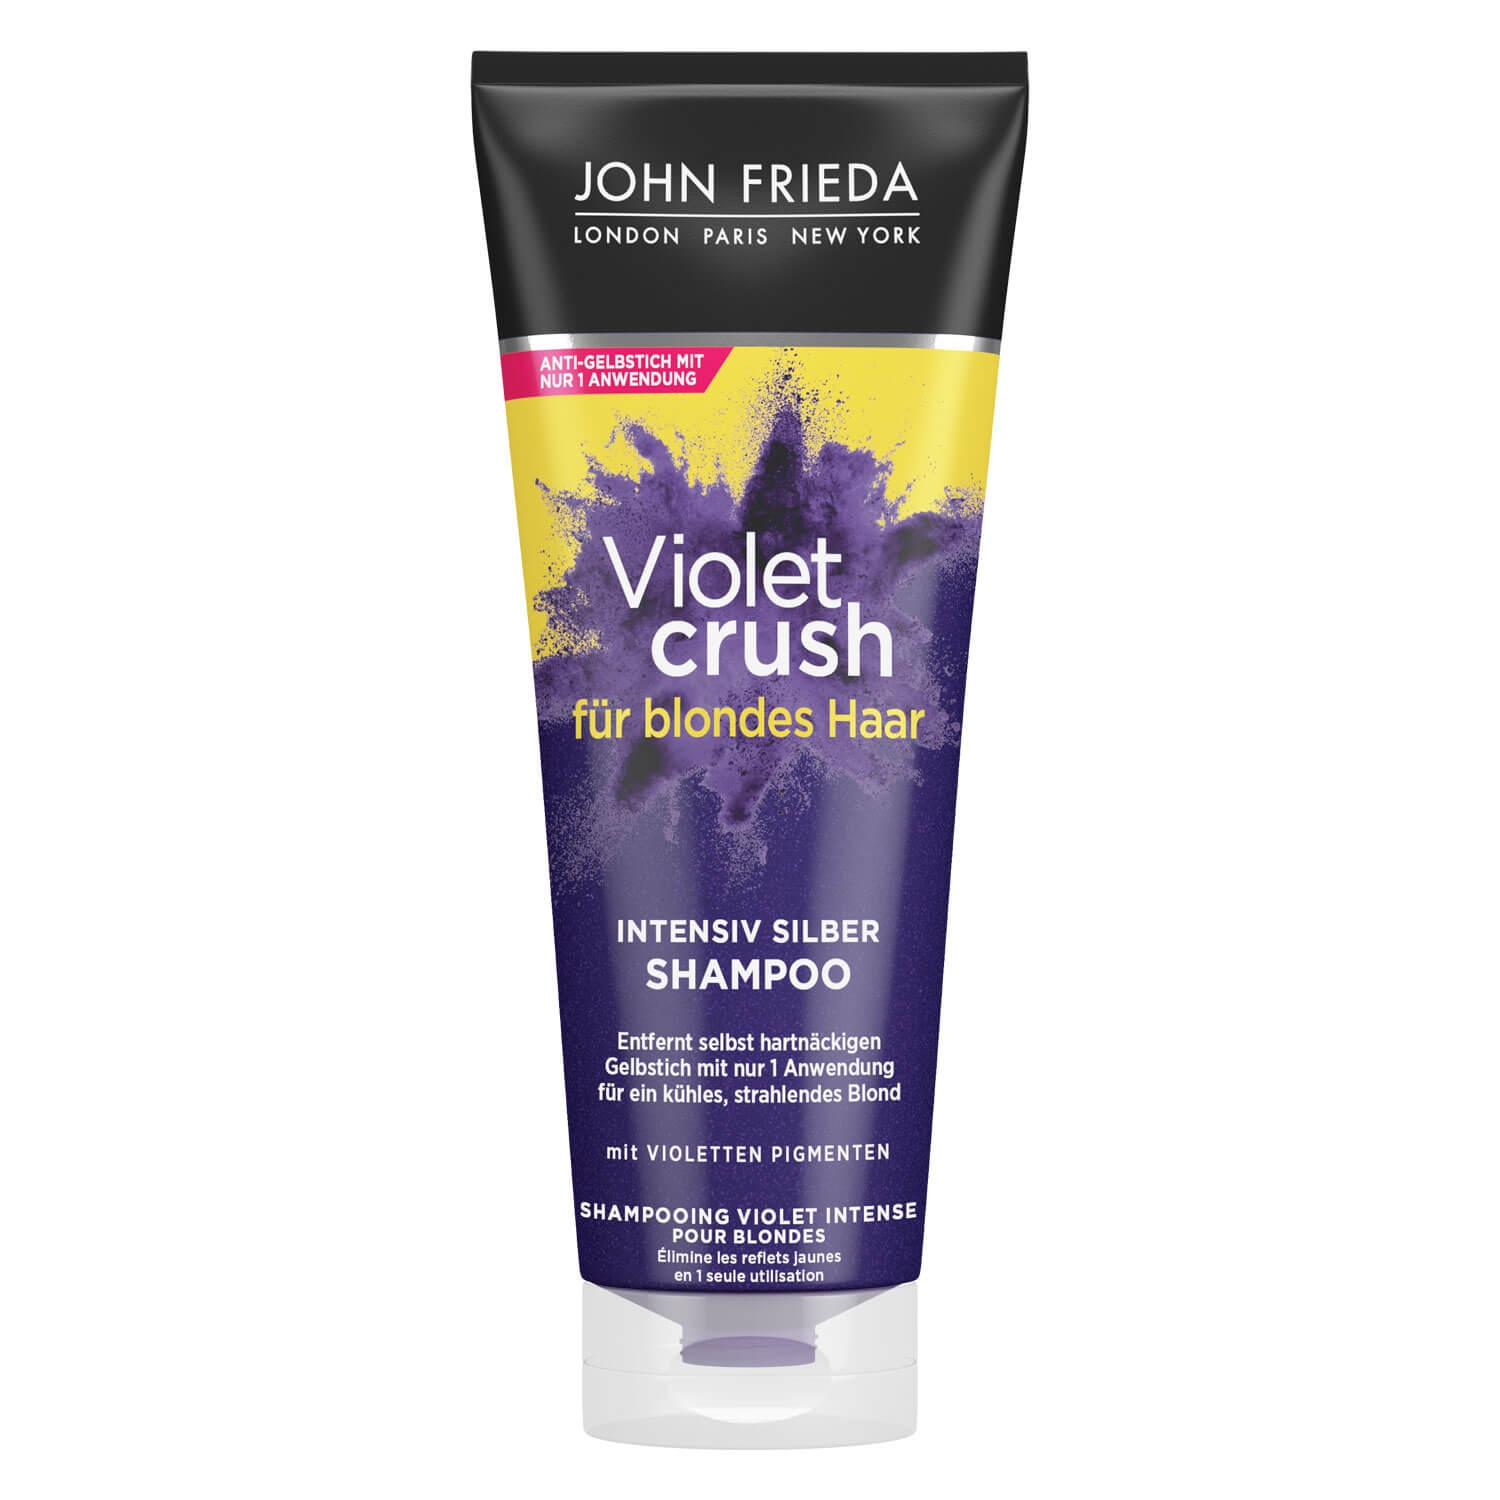 Product image from Sheer Blonde - Violet Crush Intensiv Silber Shampoo